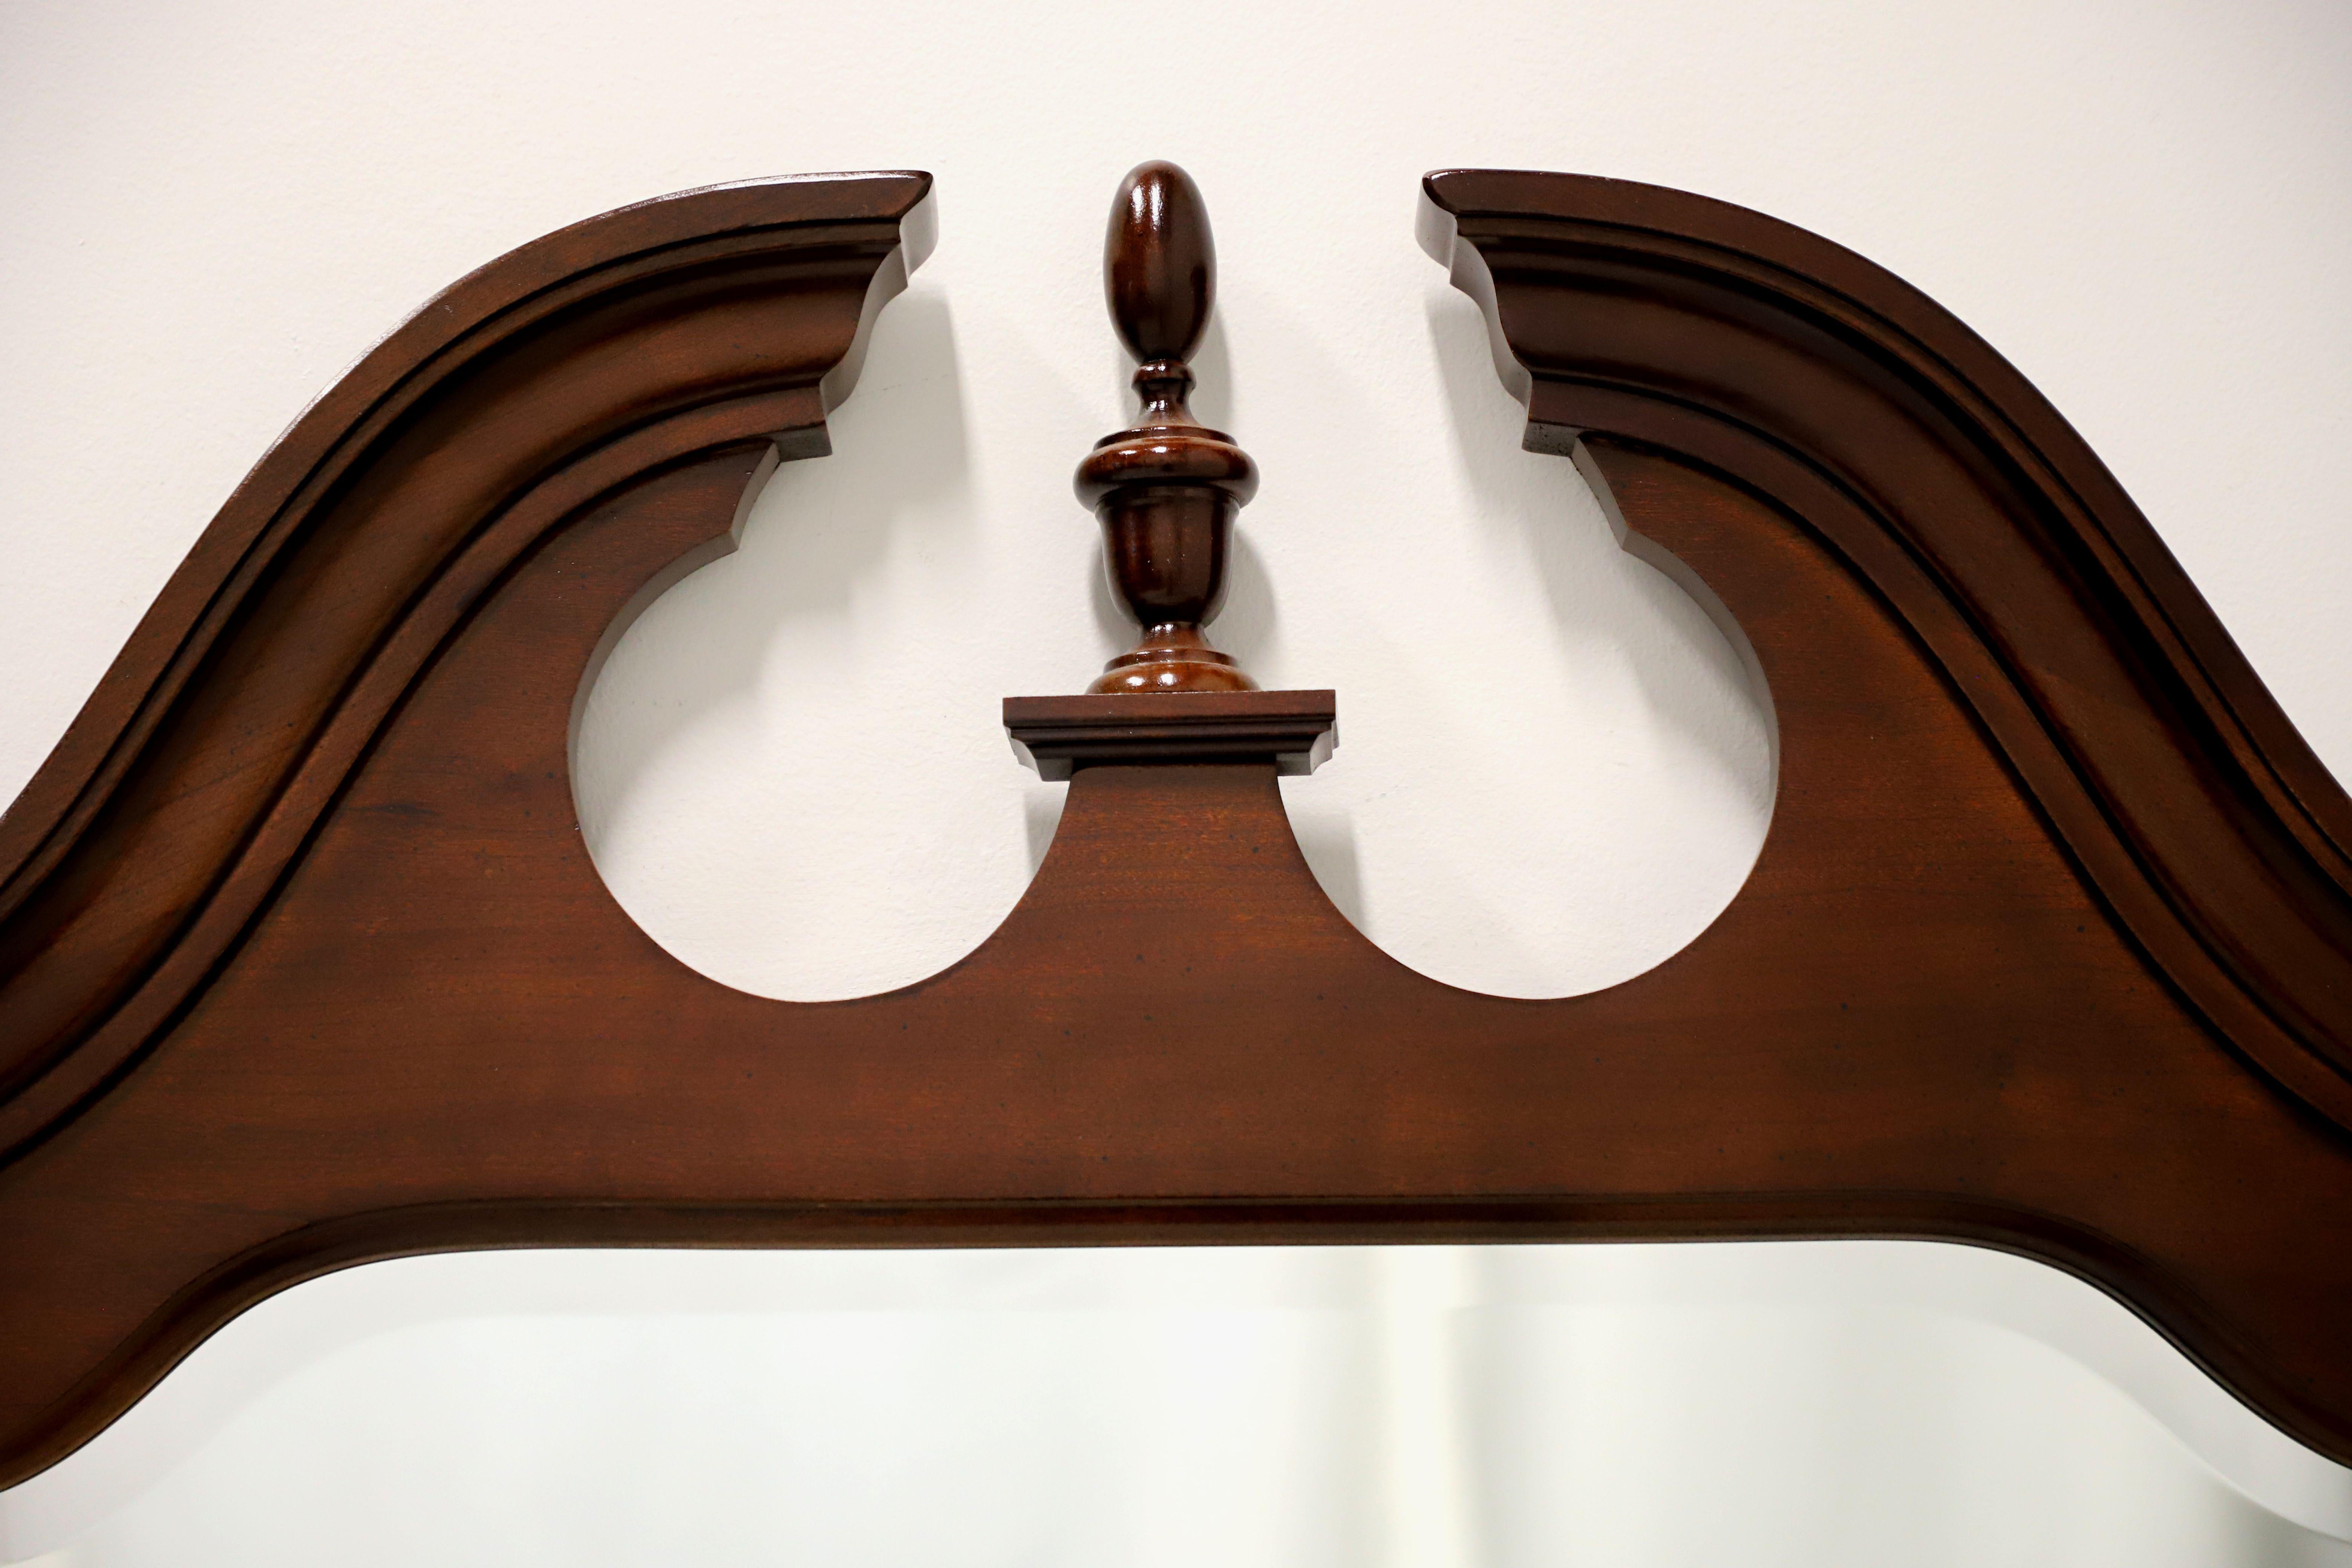 A tri-fold dresser mirror in the Chippendale style by Thomasville, from their Collectors Cherry Collection. Cherry wood frame and bevel edge to mirror glass. Features a pediment with a finial to top of the center mirror and two side mirrors with